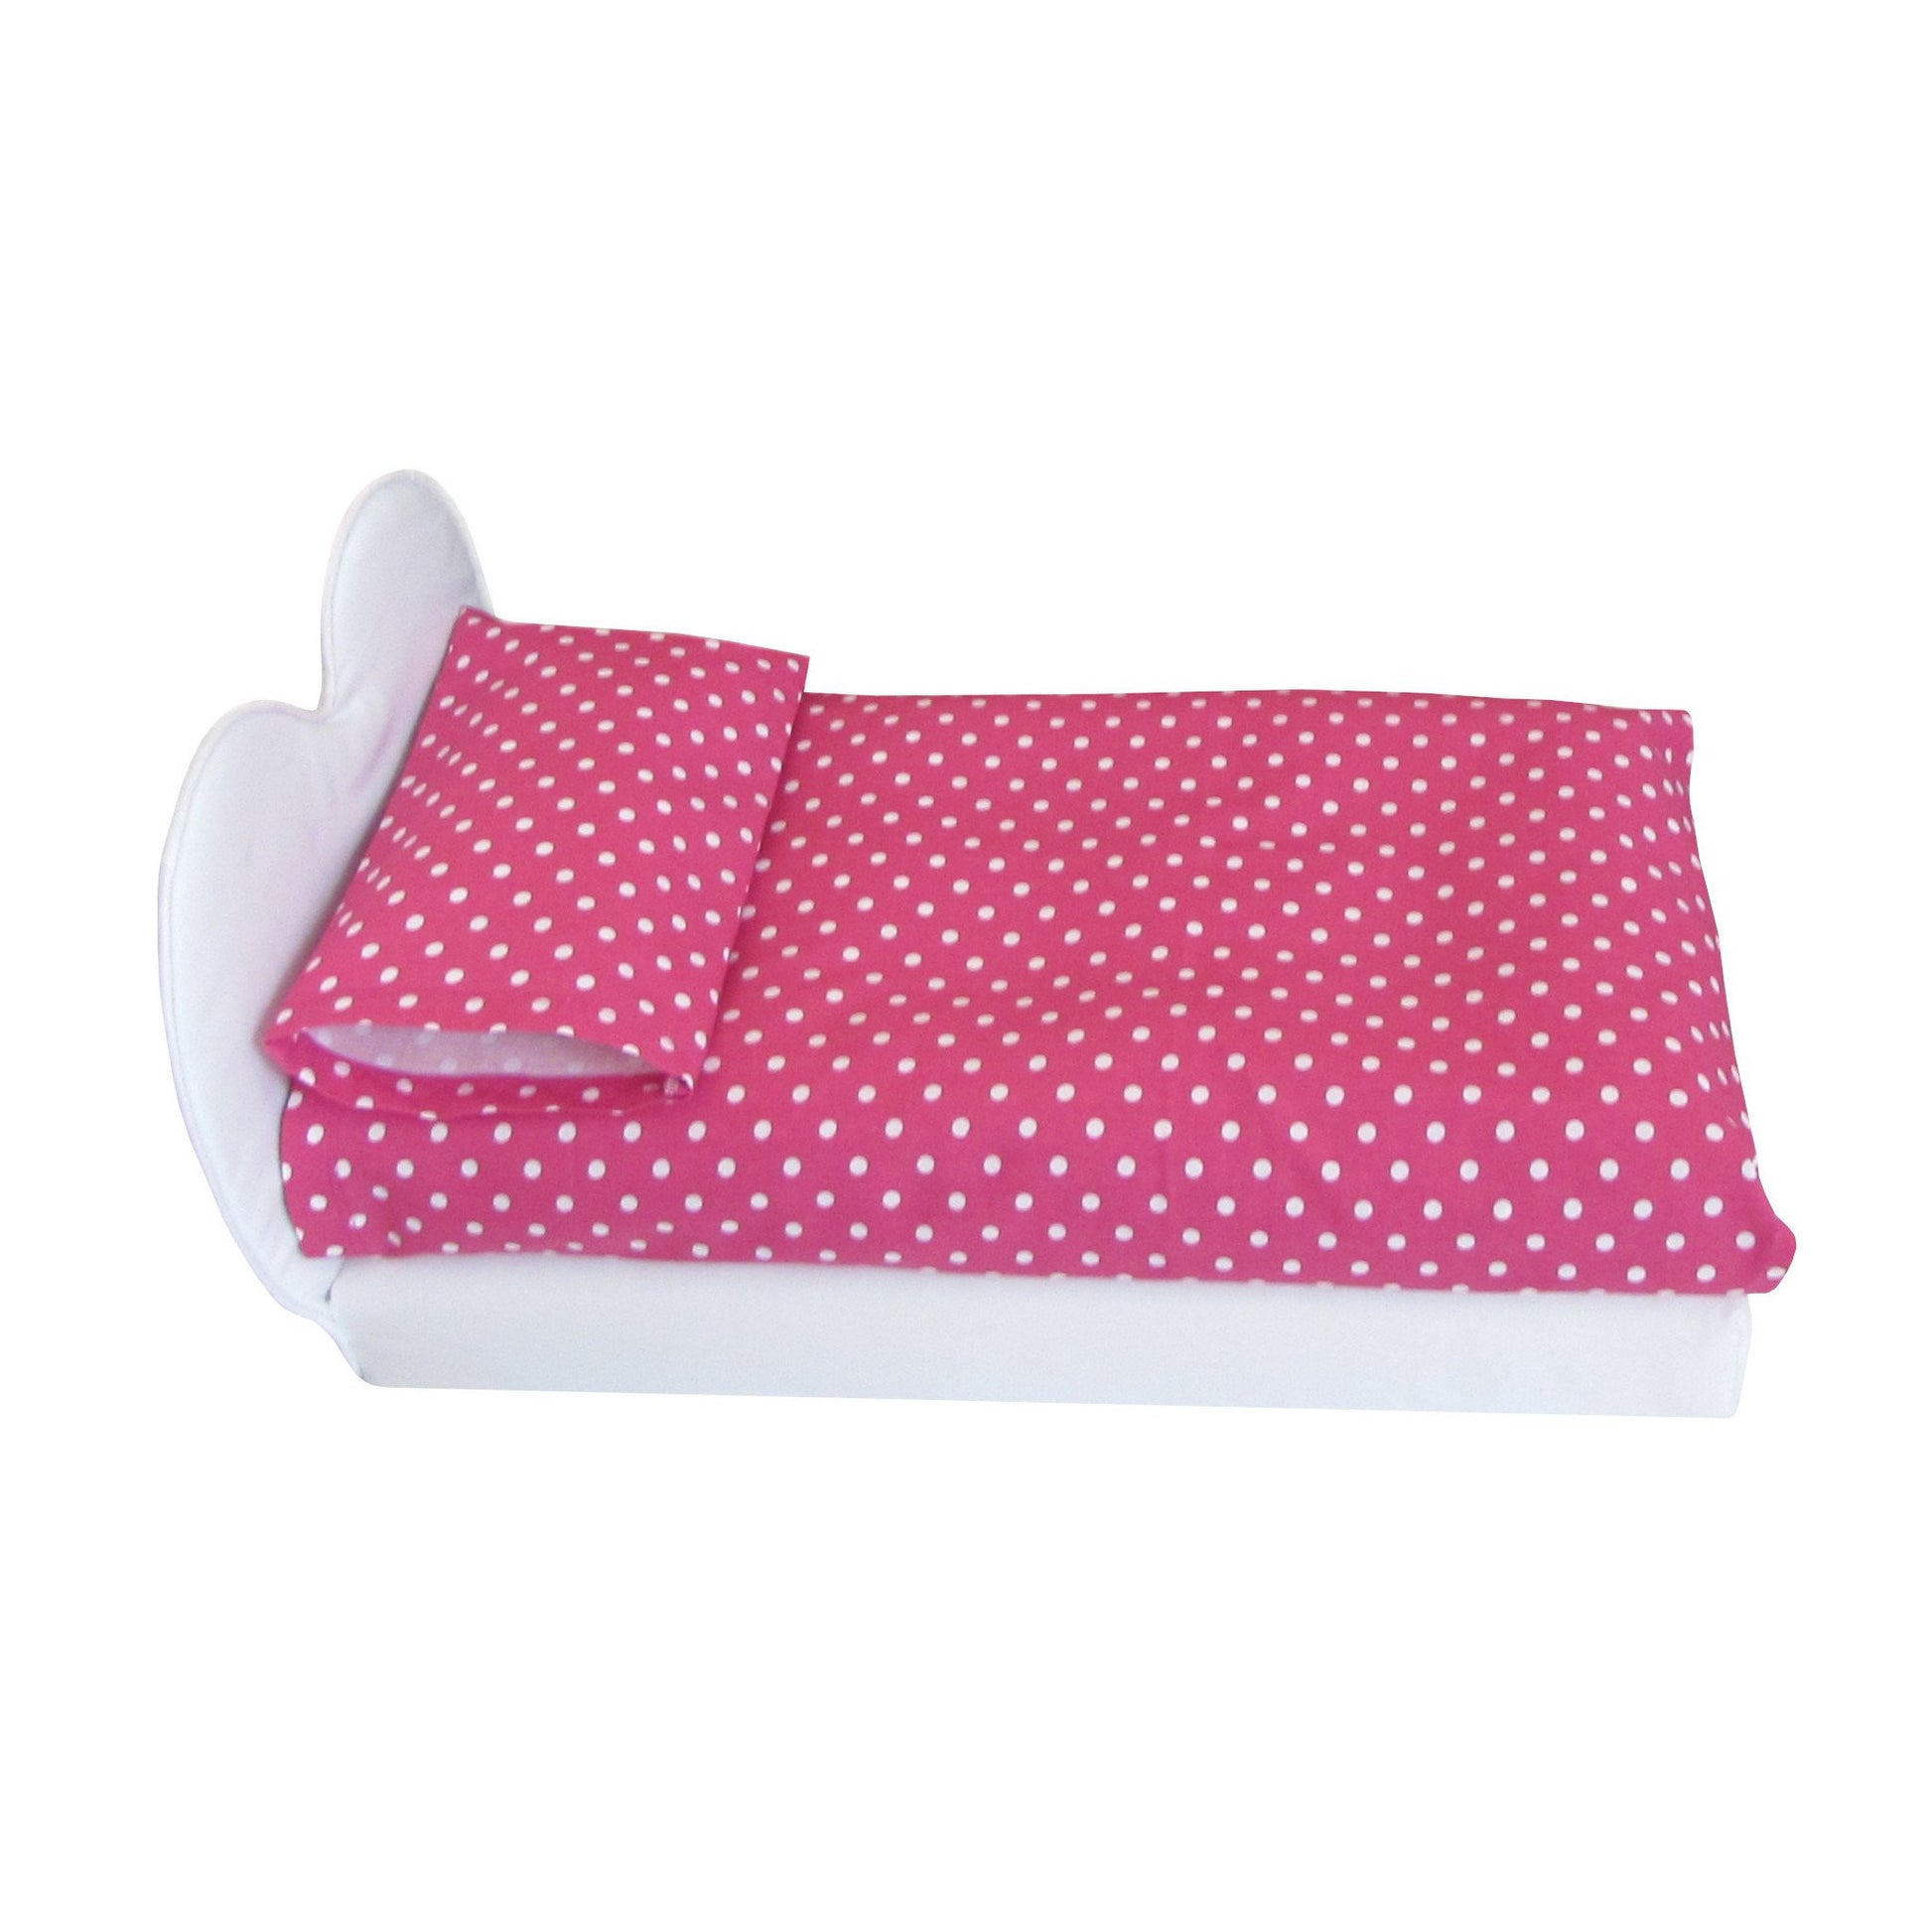 White Heart Doll Bed and Dots Pink Sheet Set for 18-inch dolls